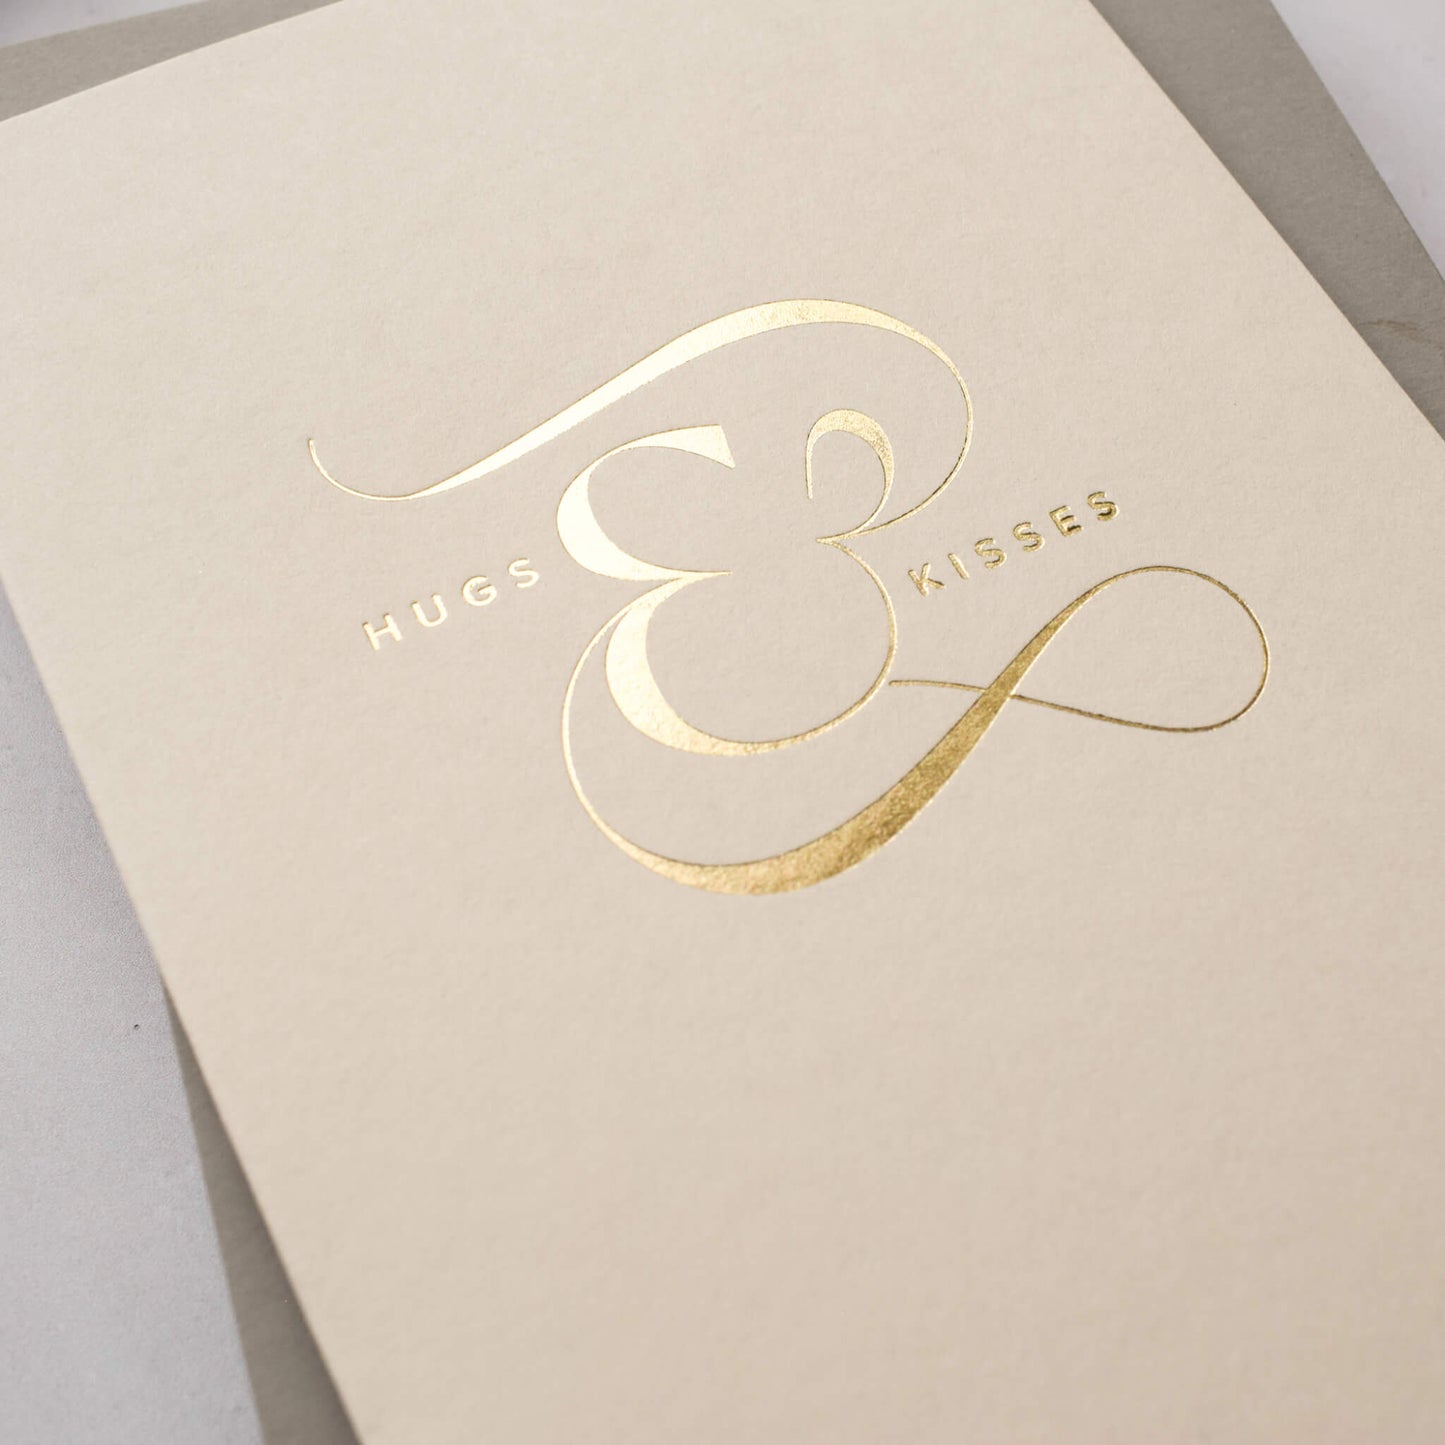 Hugs and Kisses Card in Gold Foil